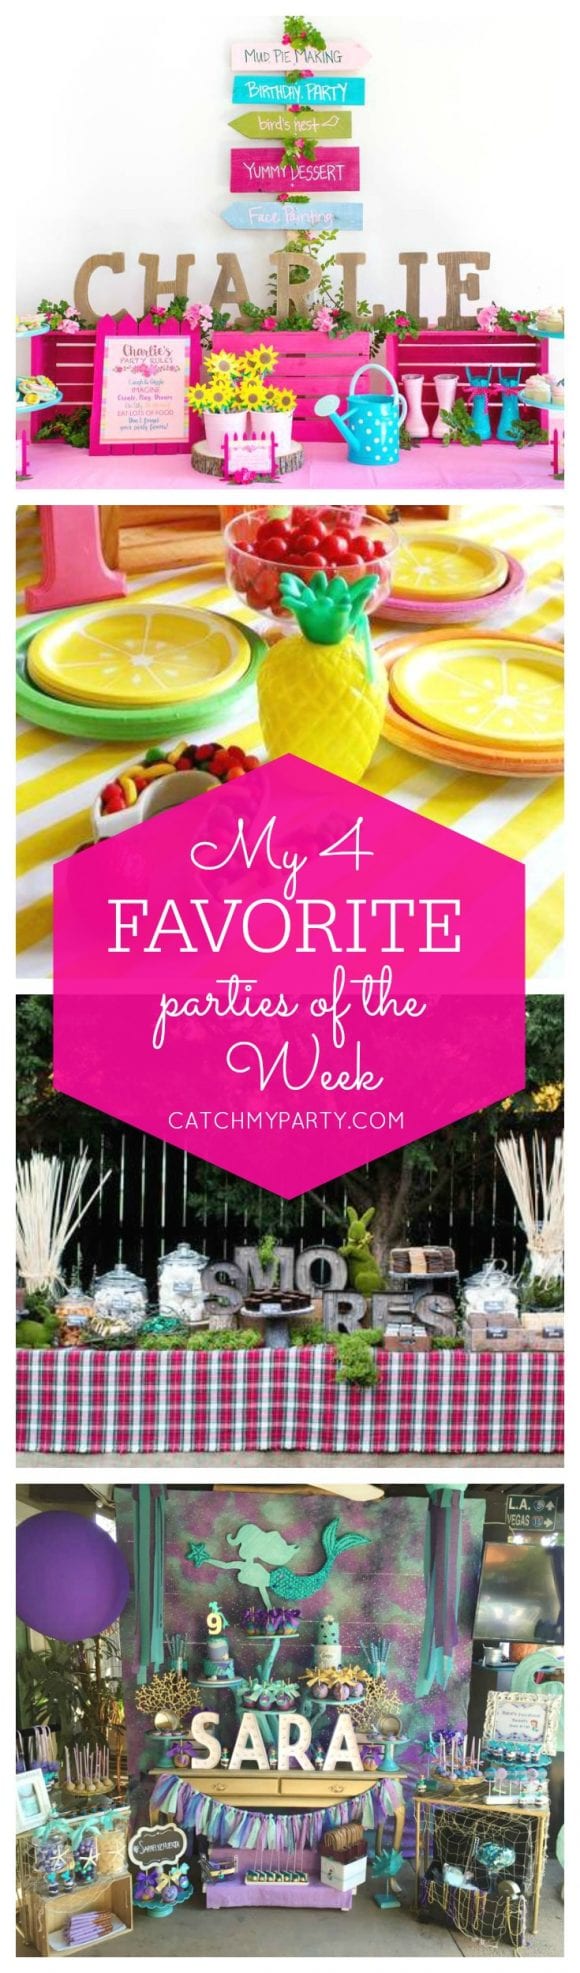 My favorite parties include a WellieWishers American Girl party, a two-tti frutti party, a s'mores bar and a mermaid party | Catchmyparty.com